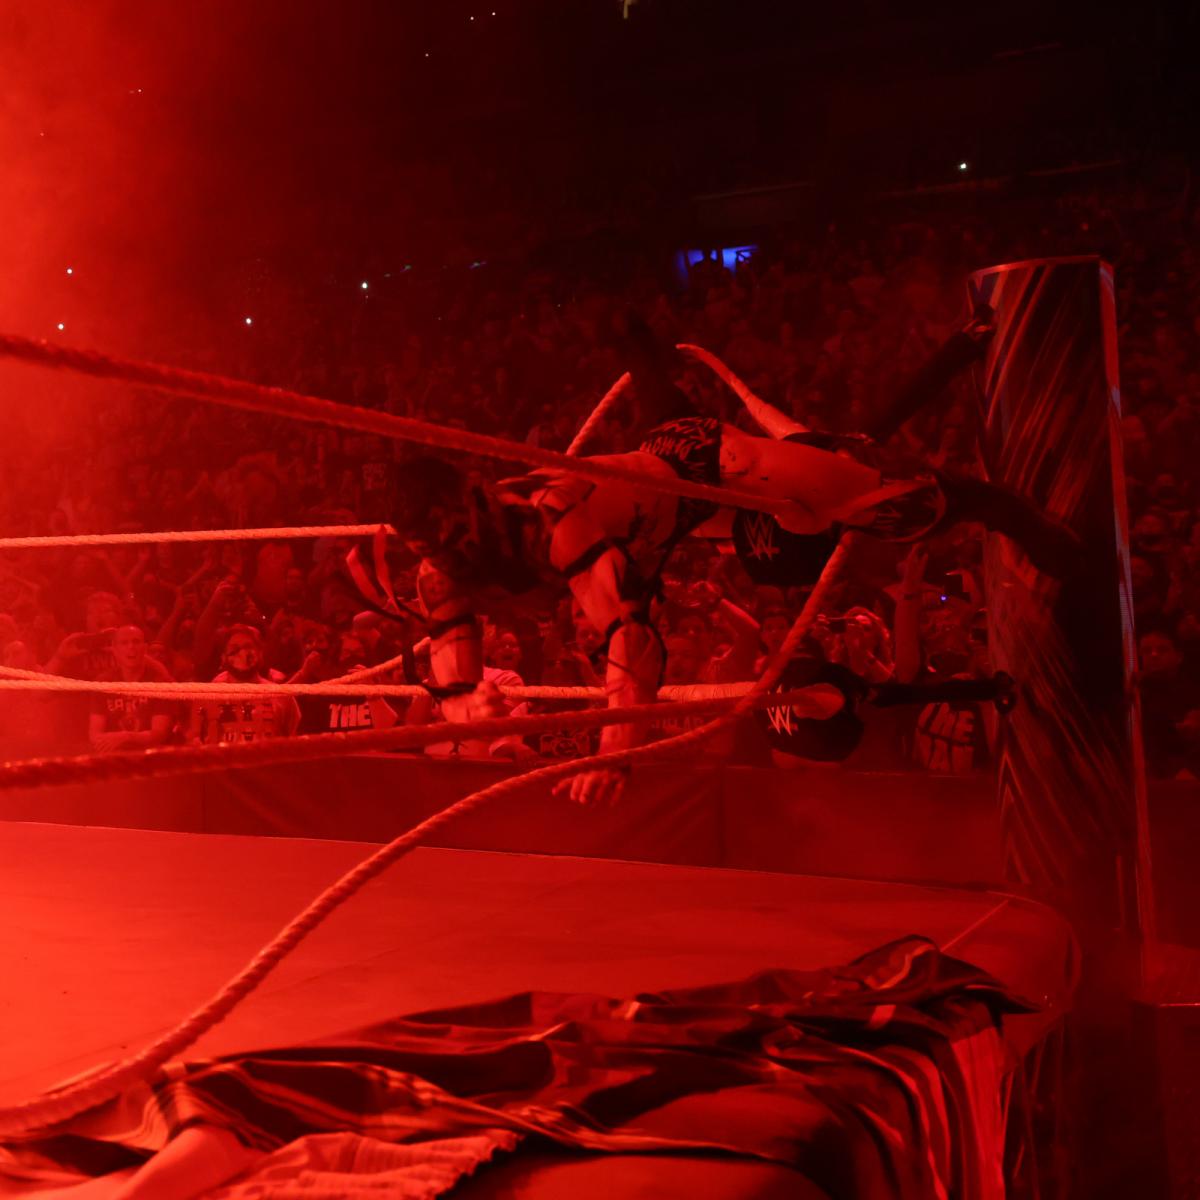 Rope Malfunction Drops 'The Demon'! RIP Lilly! Extreme Rules 2021 Recap